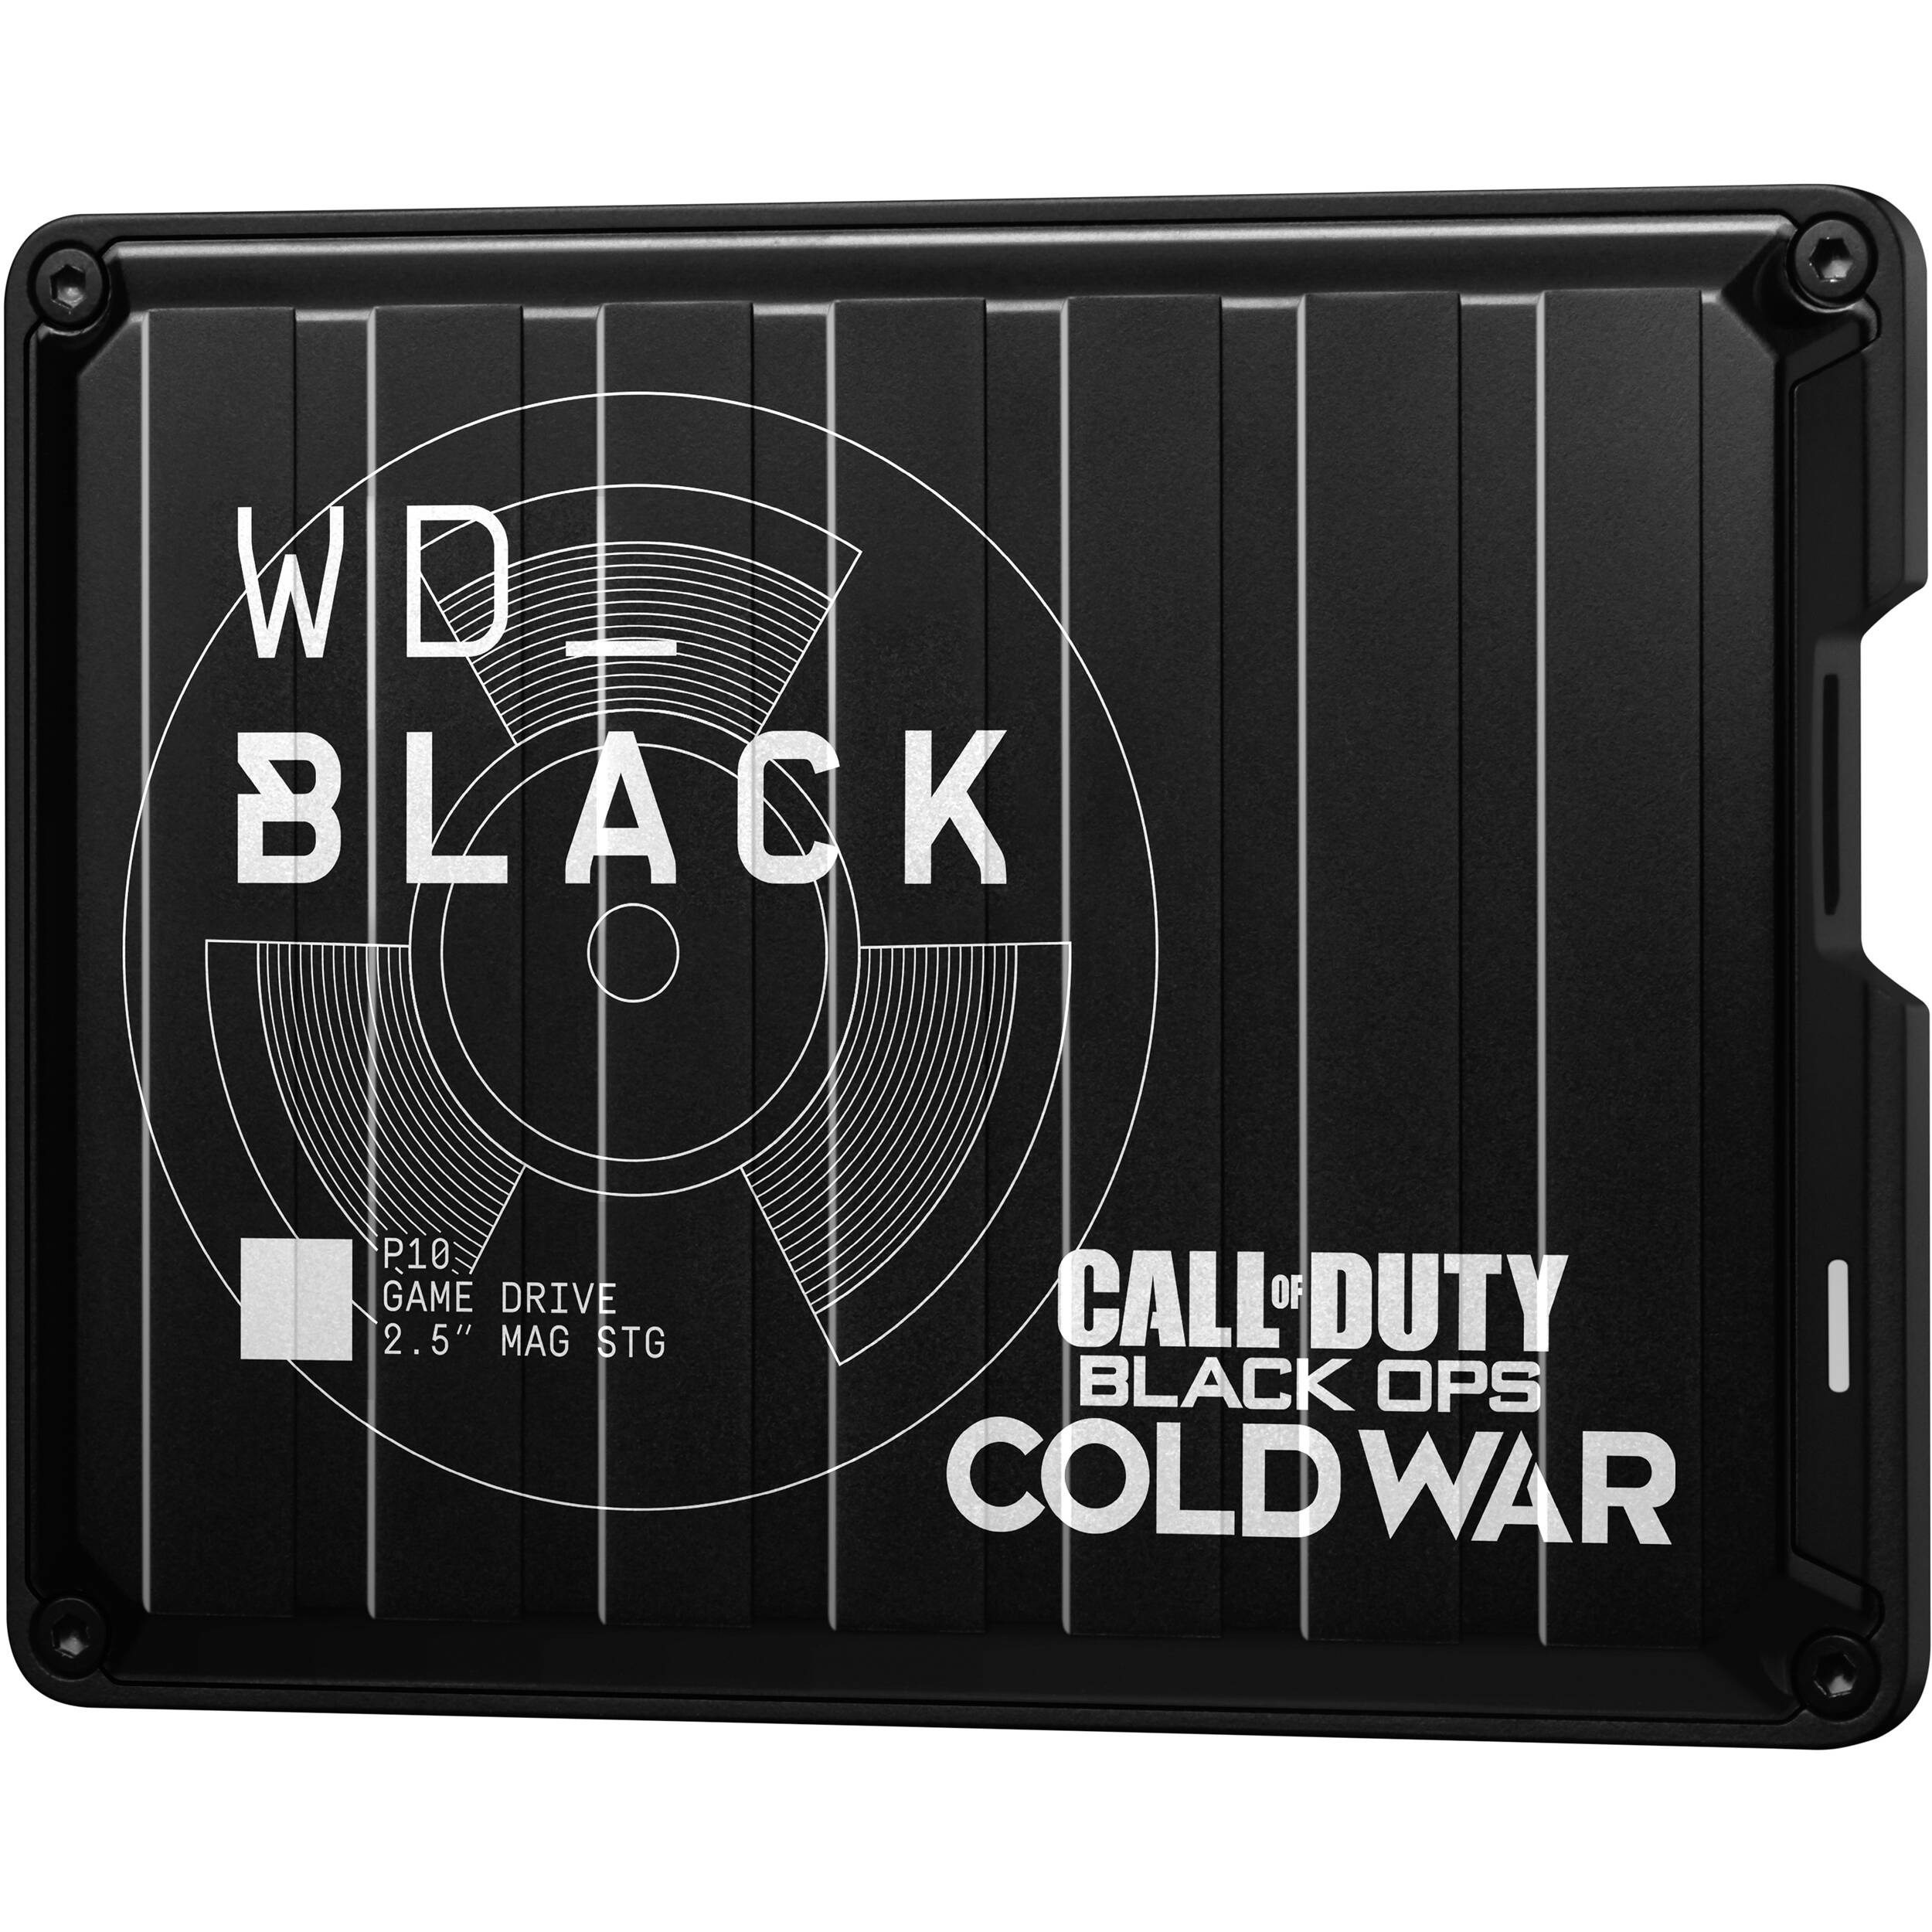 Wd 2tb Wd Black Call Of Duty Black Ops Cold Wdbazc00bbk Wesn